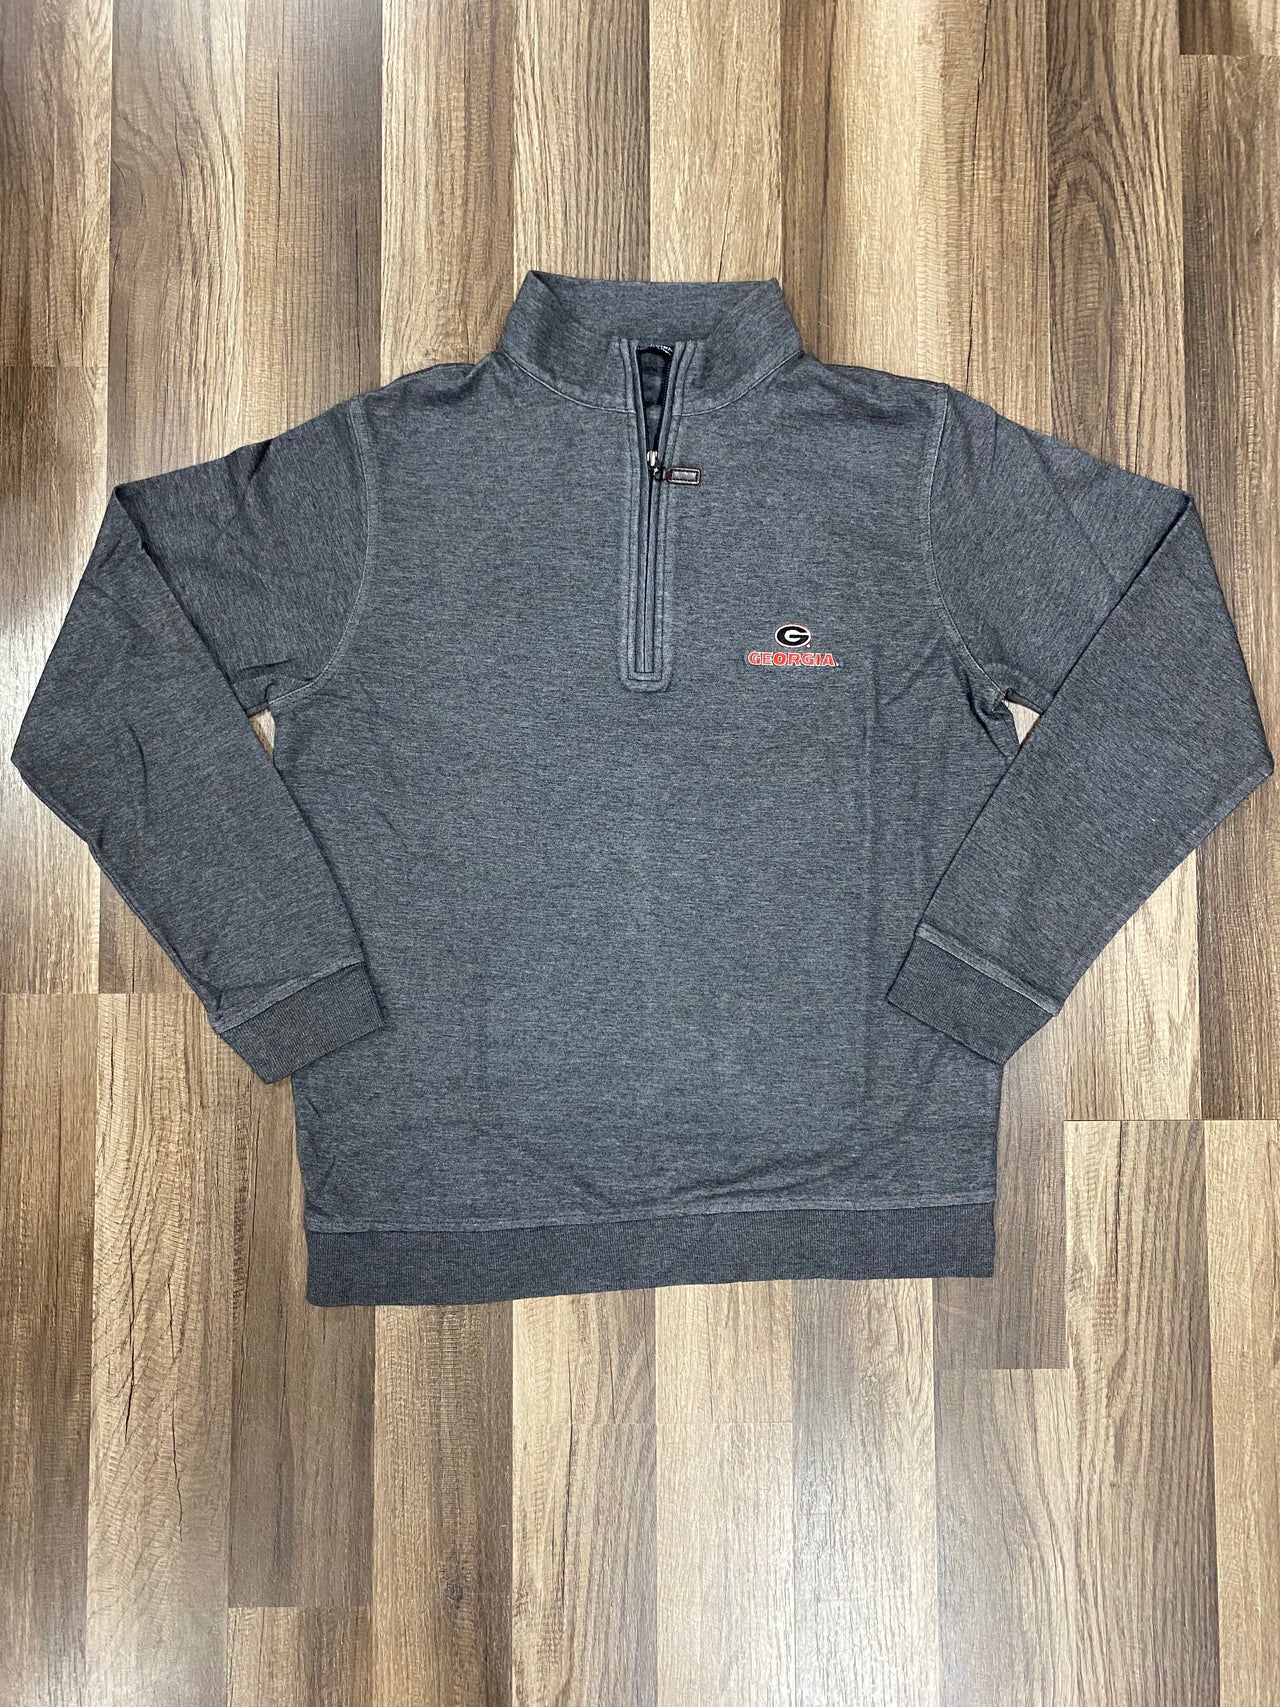 UGA Charcoal Stretch Cotton Pullover